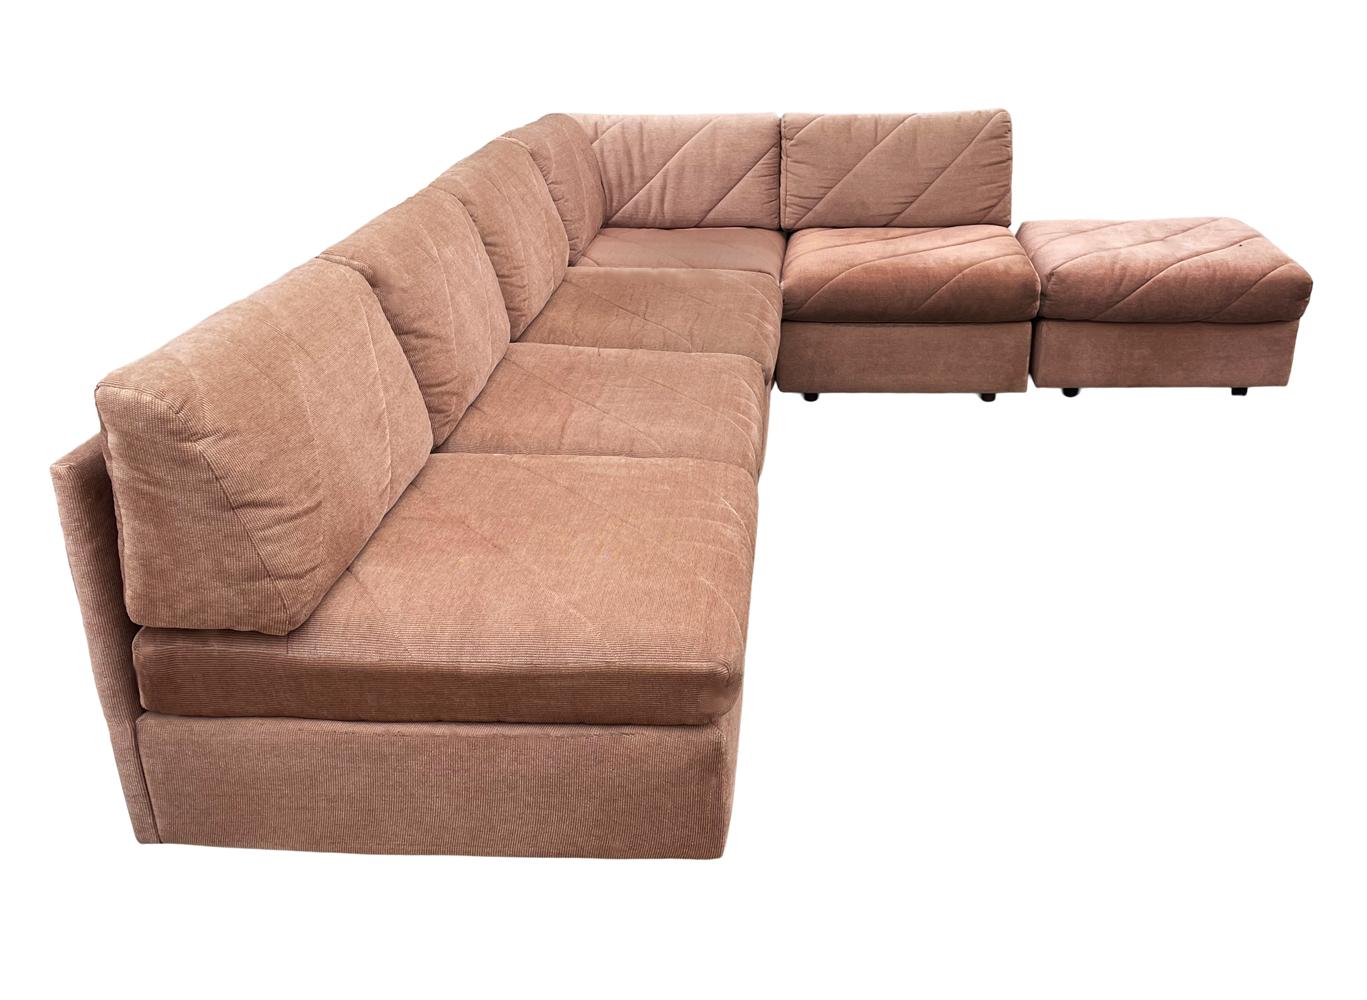 Late 20th Century Six Piece Mid Century Boxy Modern Modular or Sectional L Shaped Sofa For Sale